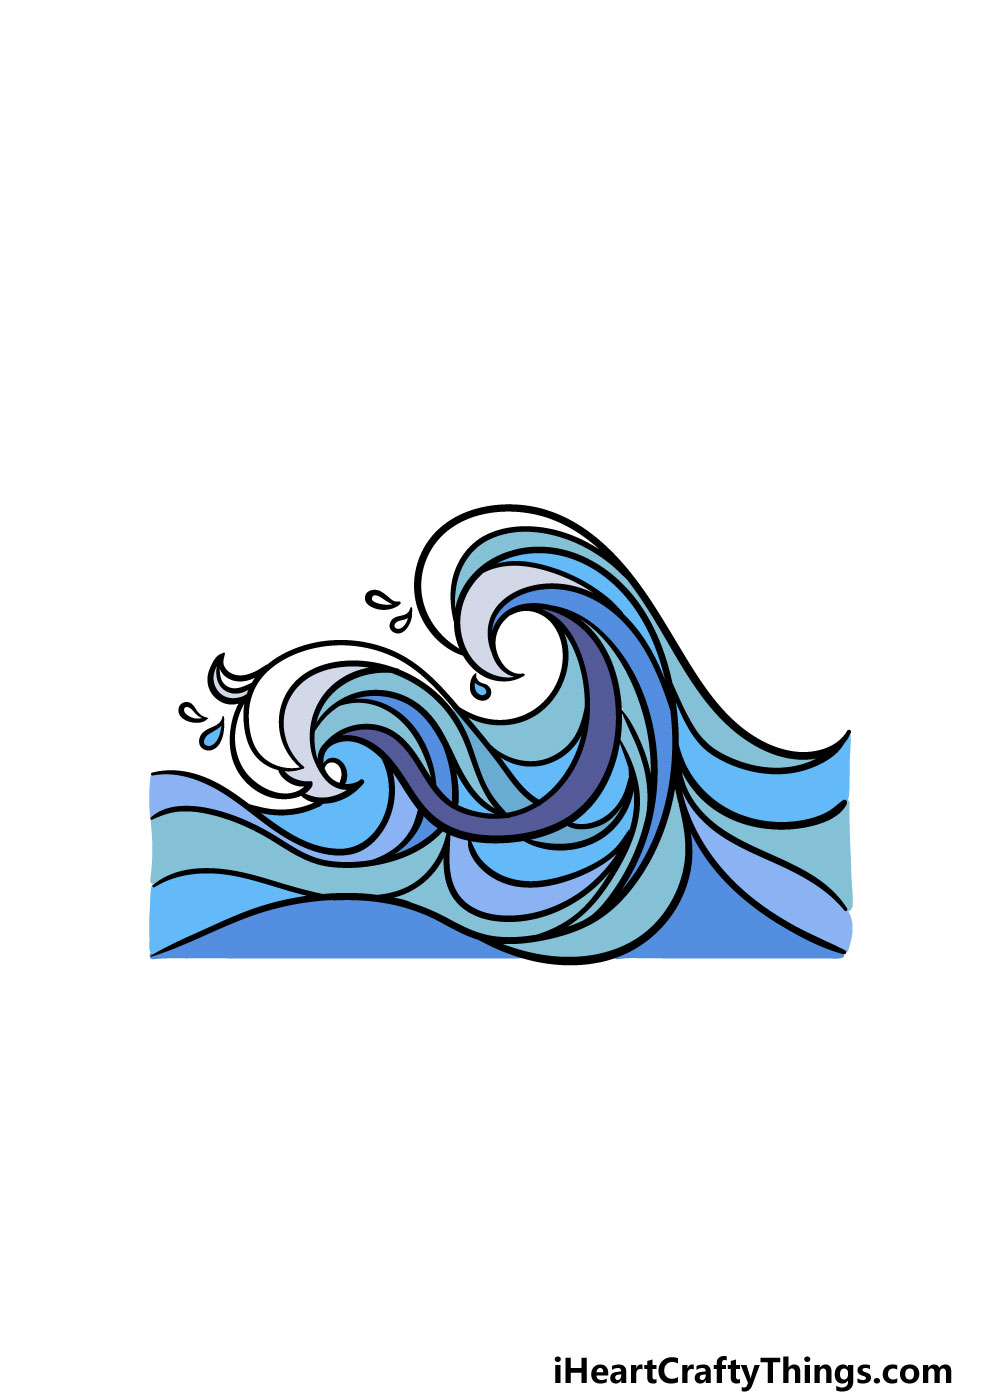 How To Draw Ocean Wave Draw. Imagine. Create.